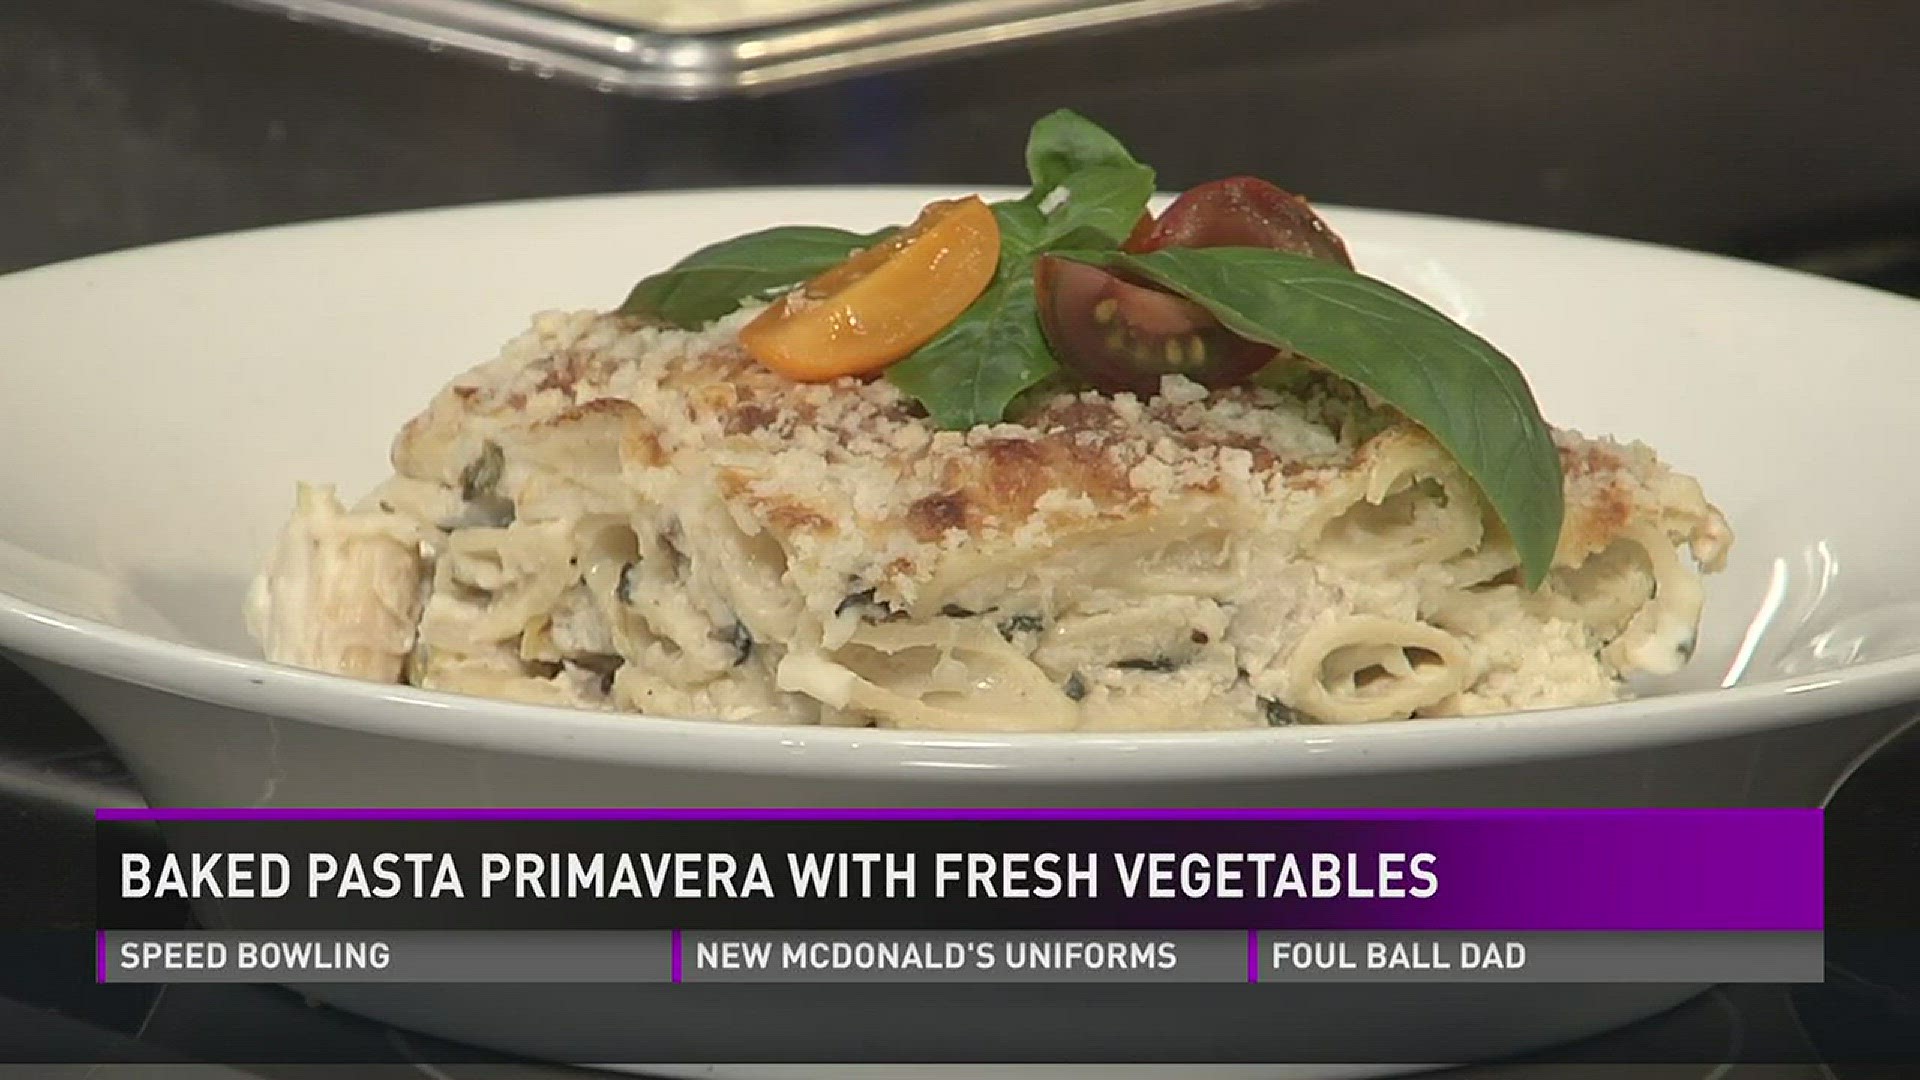 Chef Frank Aloise from Cappuccino's shows how to make baked pasta primavera with fresh vegetables.